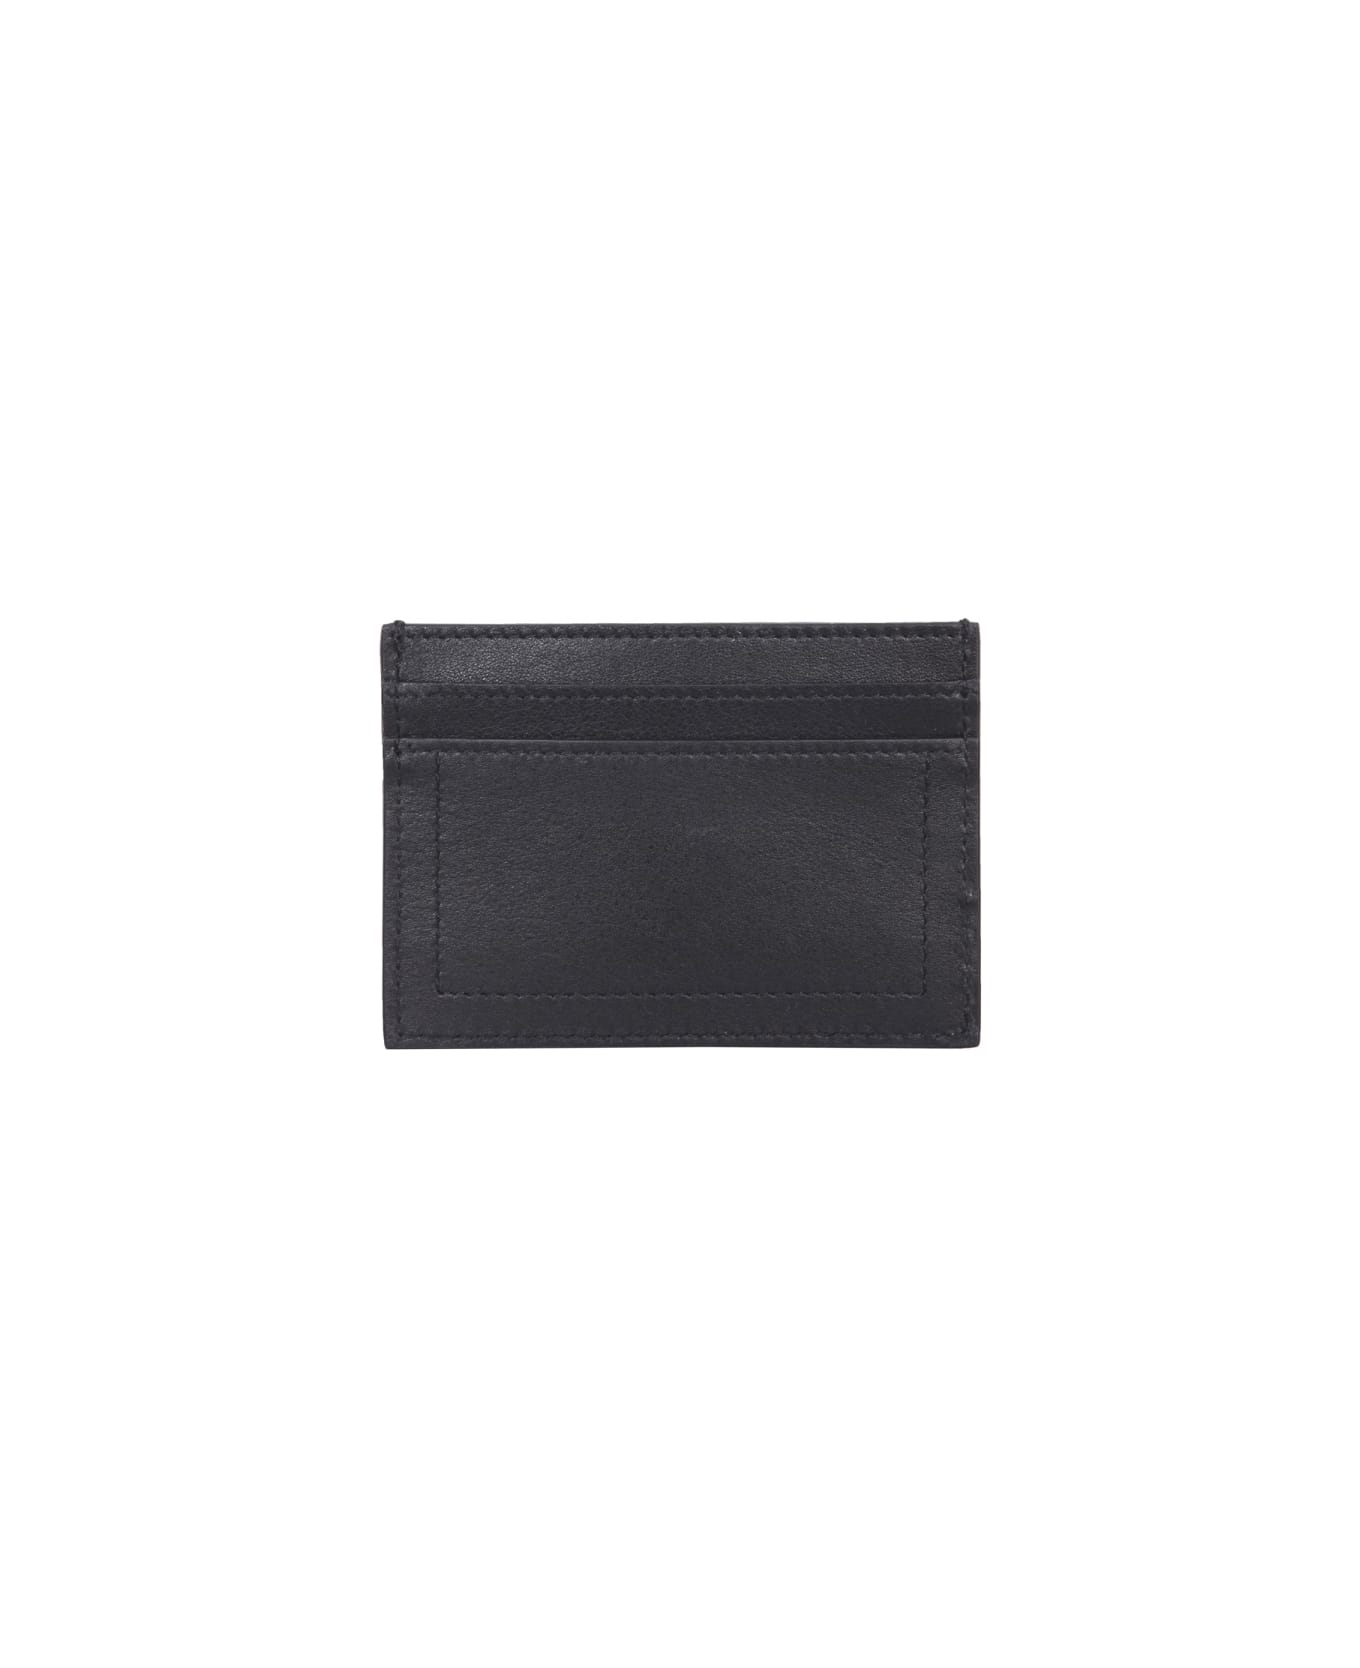 Moschino Leather Card Holder - BLACK